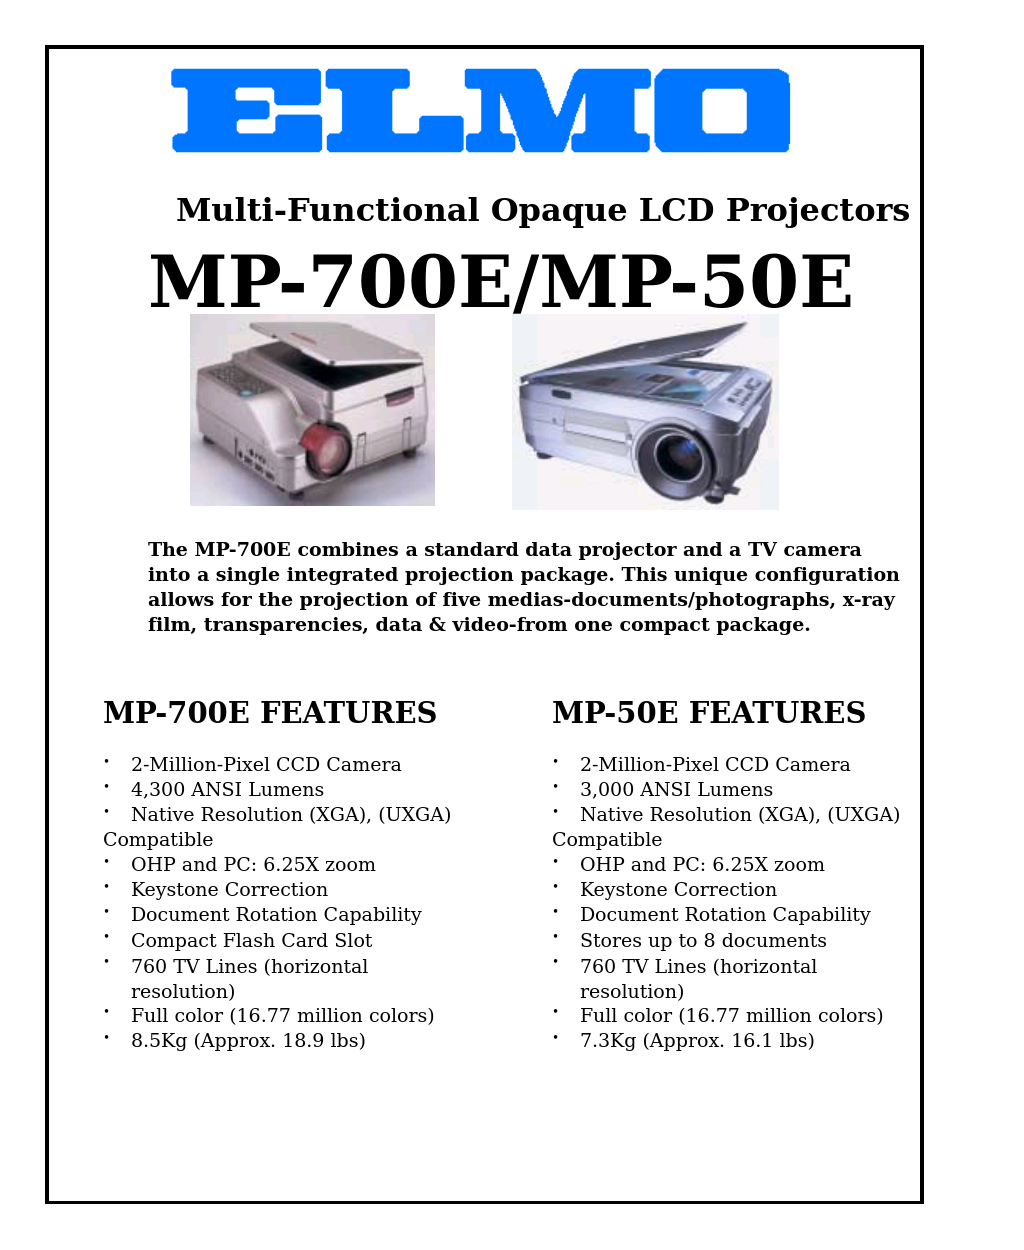 MULTI-FUNCTIONAL OPAQUE LCD PROJECTORS MP-700E